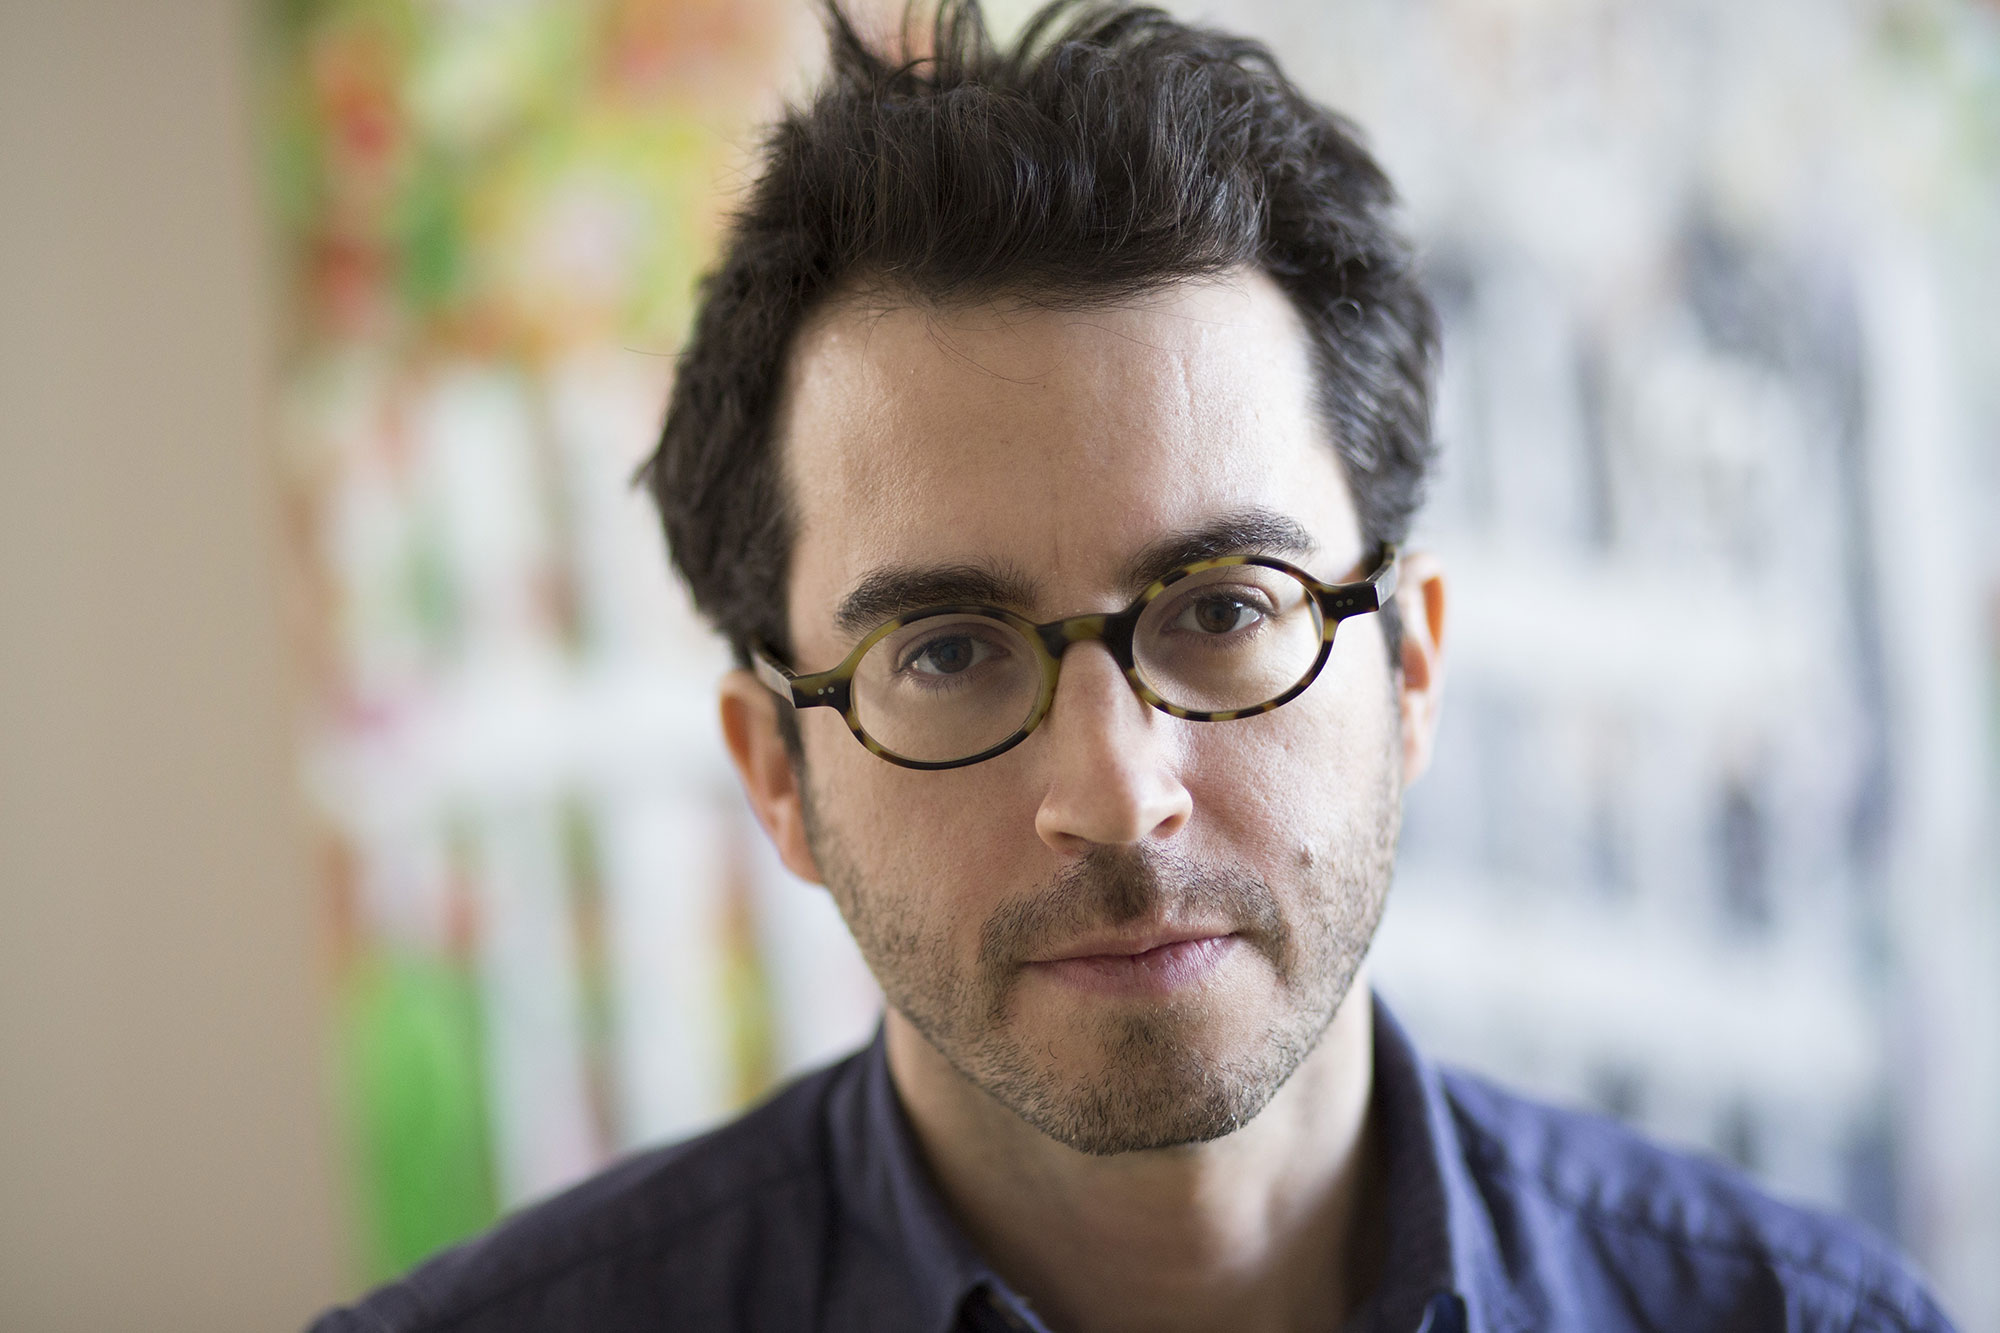 Jonathan Safran Foer is the author of “Here I Am” and other books.